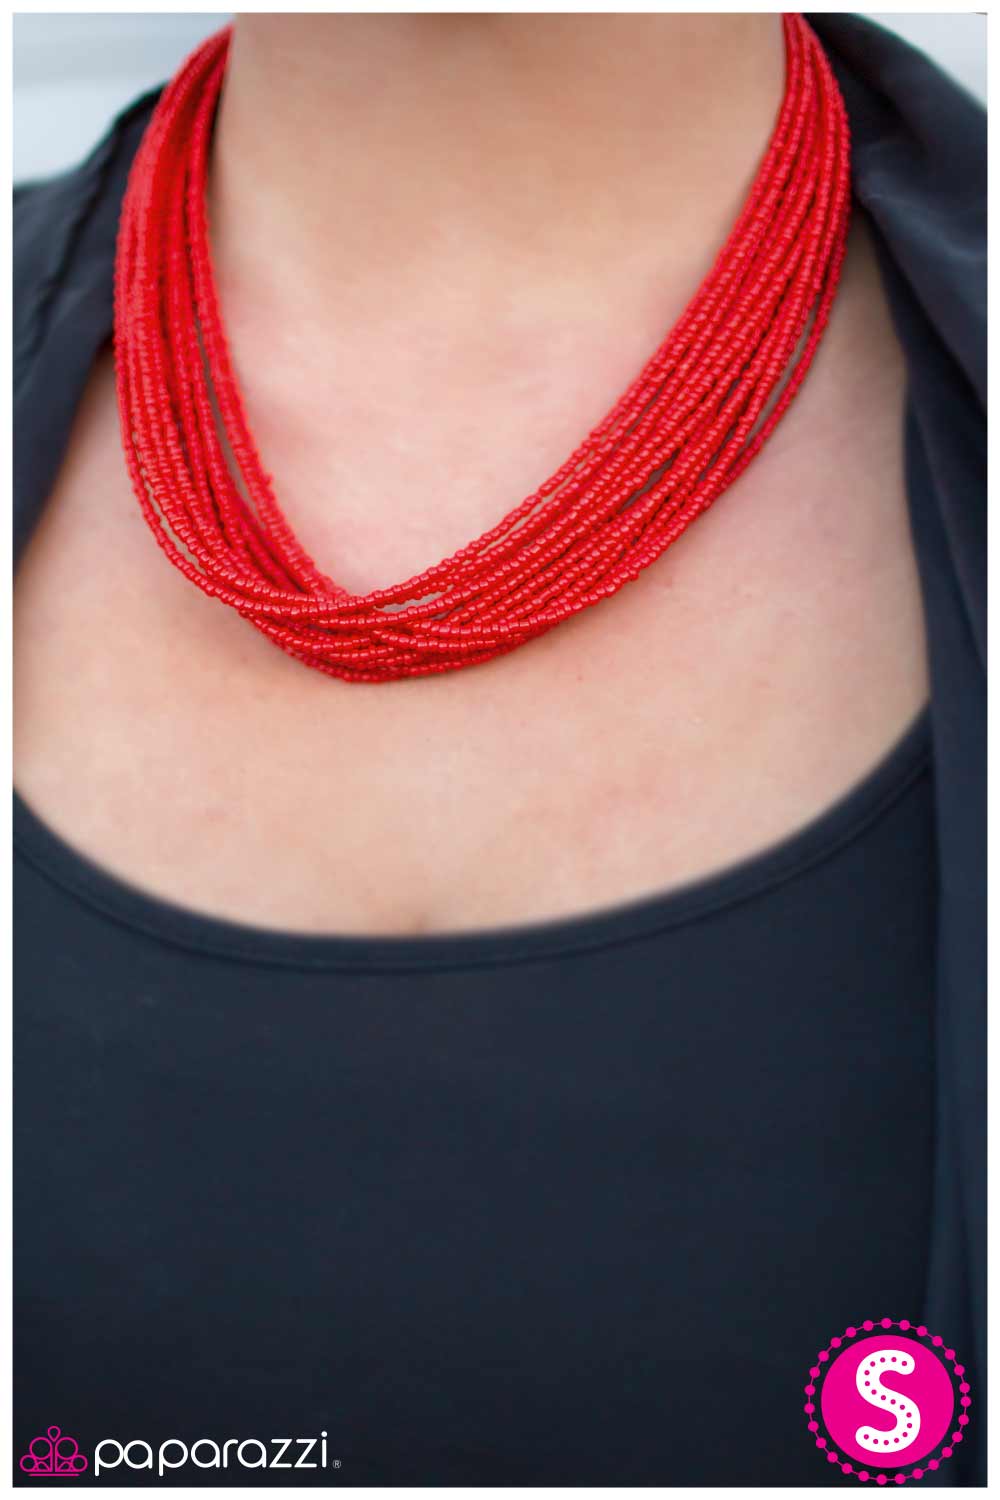 Paparazzi Necklace ~ Wide Open Spaces - Red